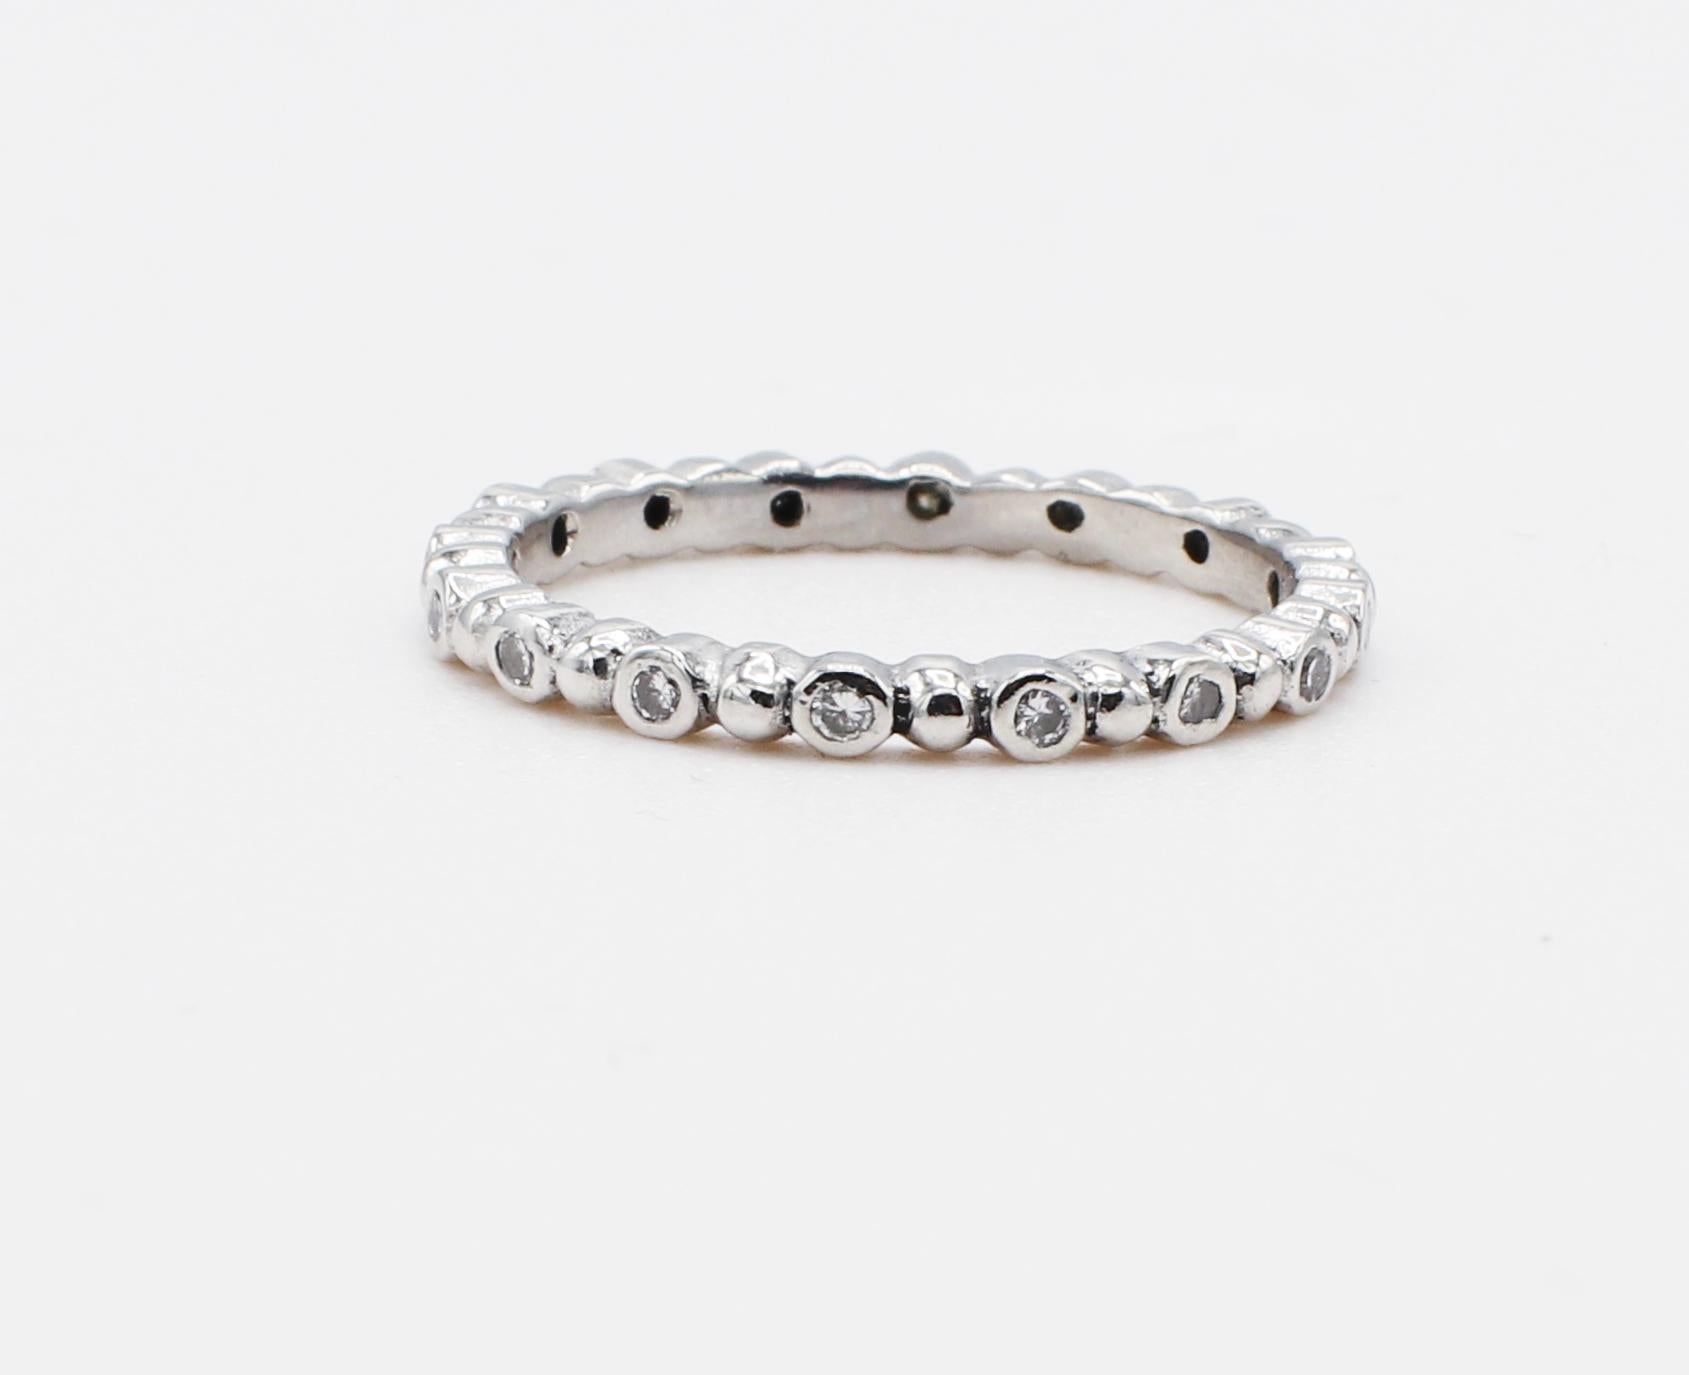 Platinum Natural Diamond Thin Eternity Band Stackable Ring Size 6.5
Metal: Platinum
Weight: 2.94 grams
Diamonds: Approx. .16 CTW G VS round brilliant cut natural diamonds
Size: 6.5 (US)
Width: 1.8 MM
